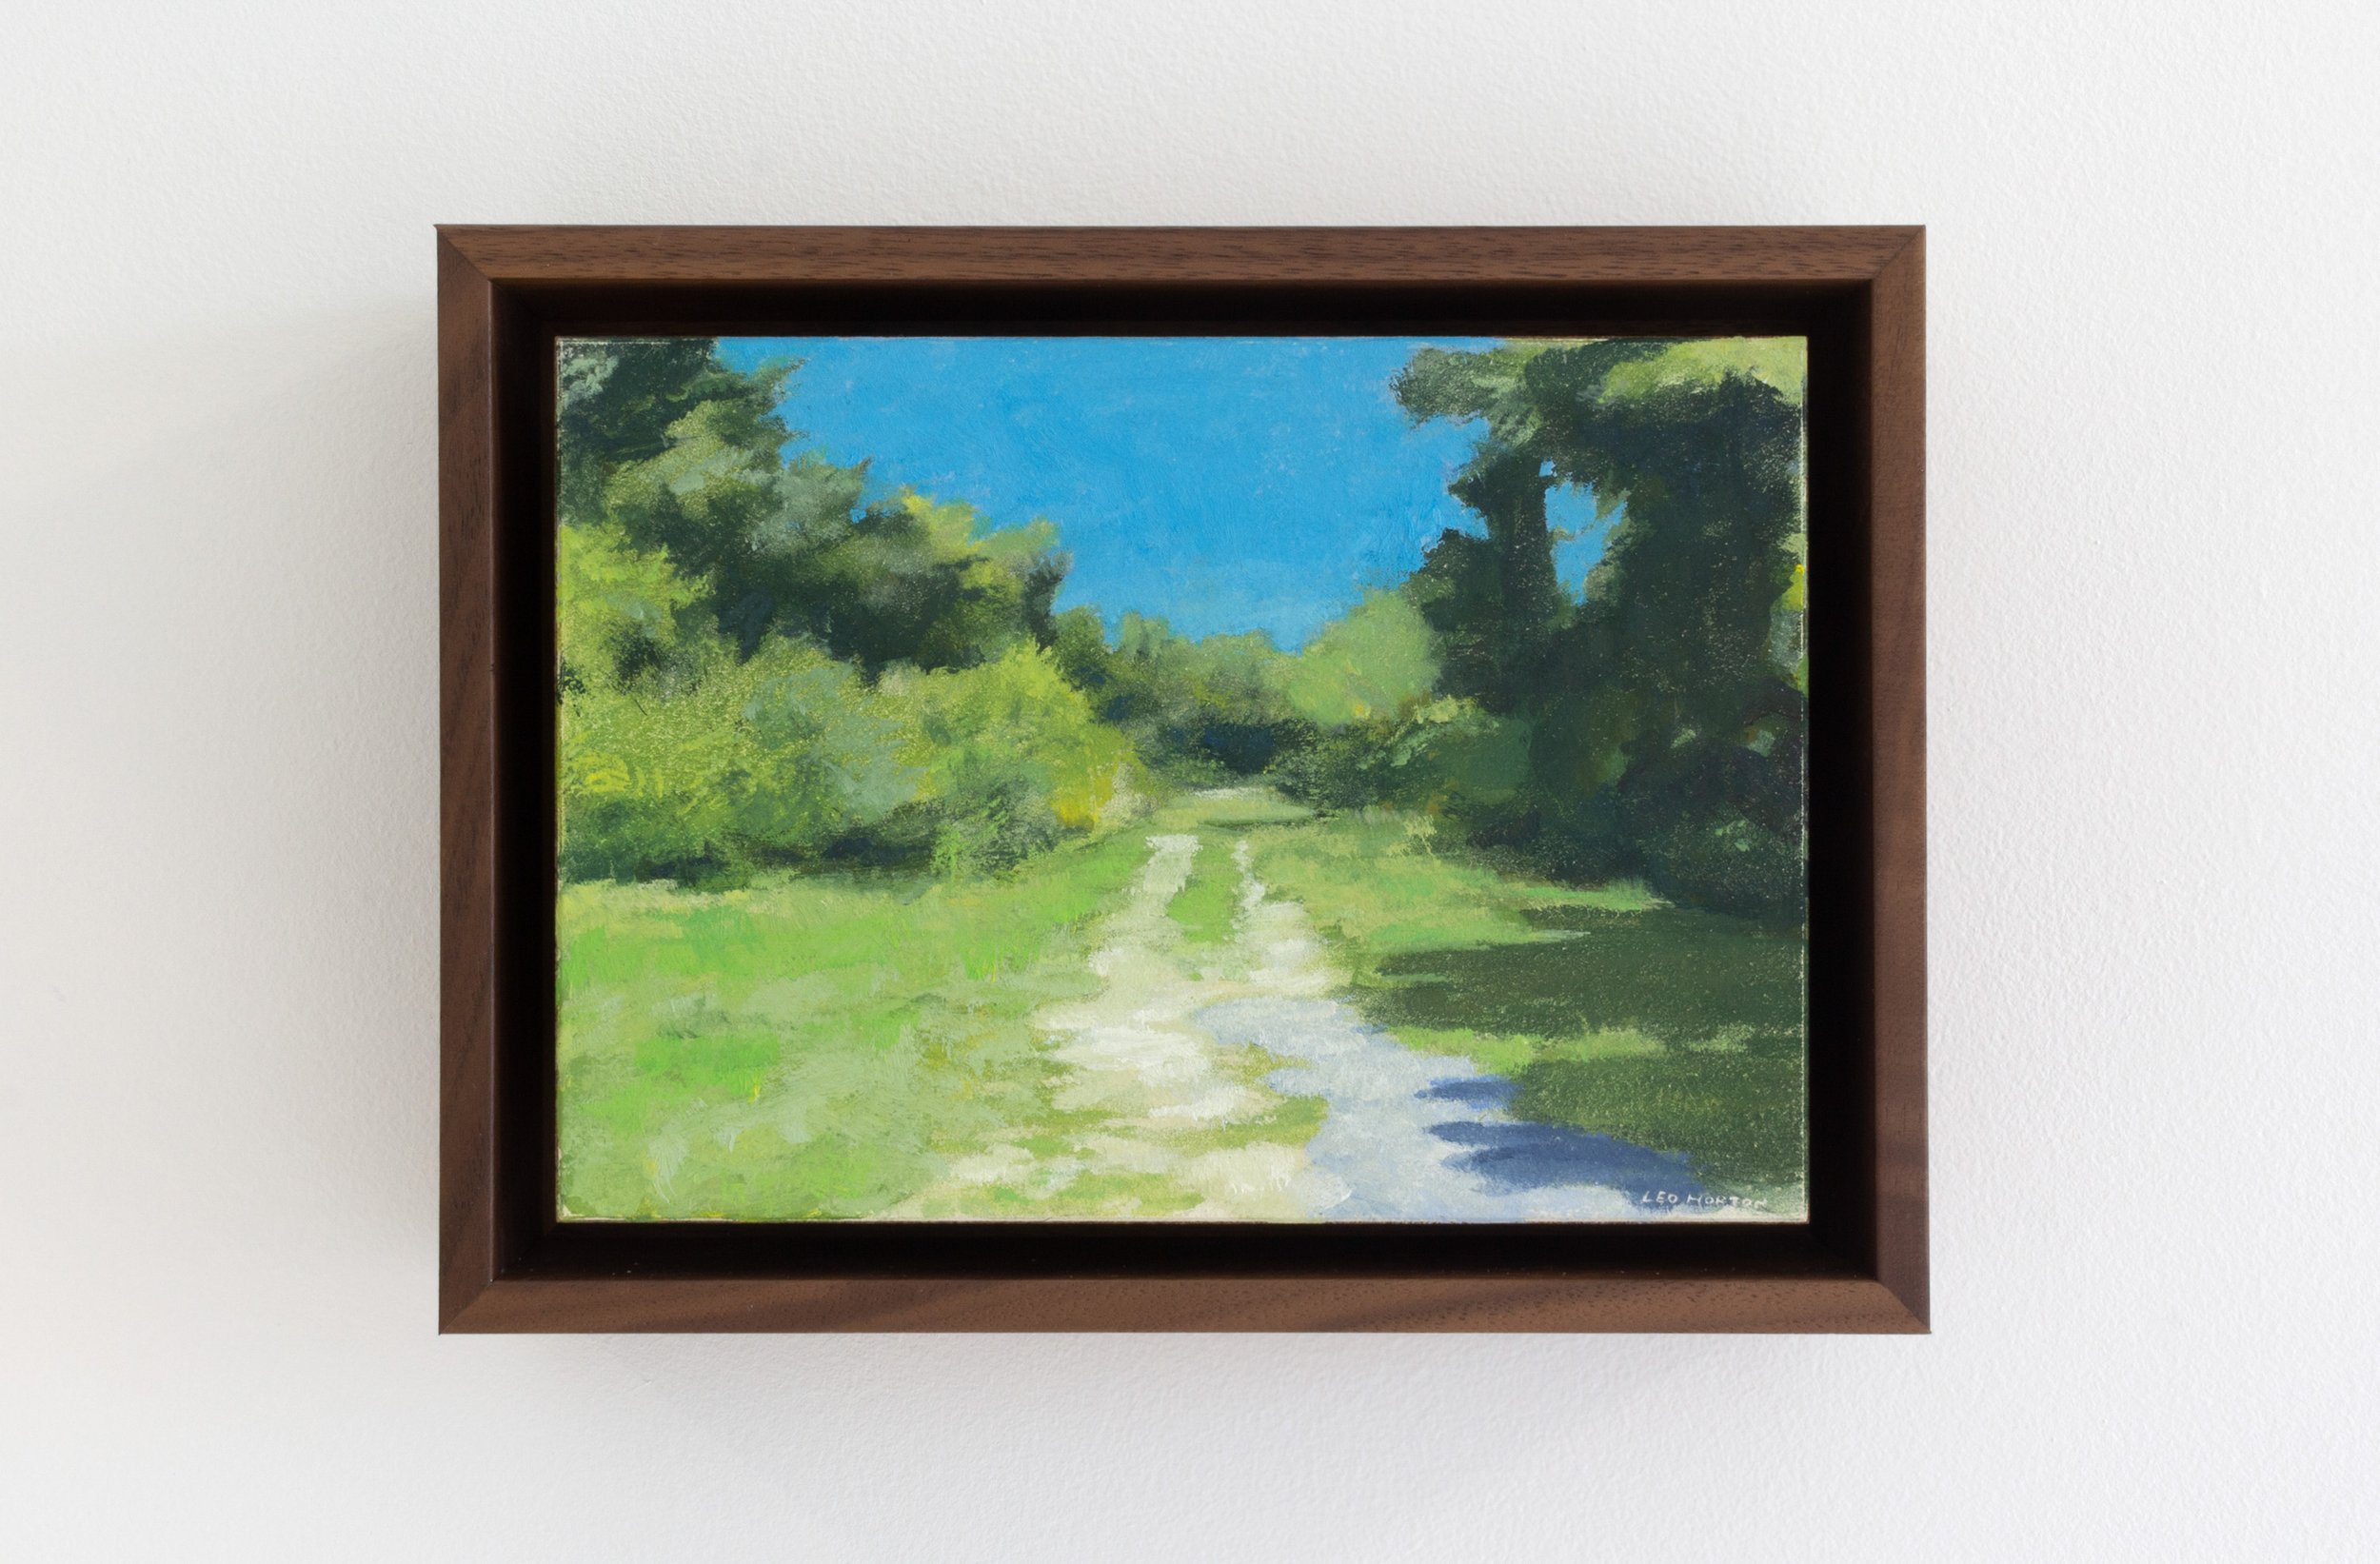  Leo Horton  Vacant Lot , 2022 Oil on canvas 7 x 5 in (8.5 x 6.5 x 2.25 in framed) 